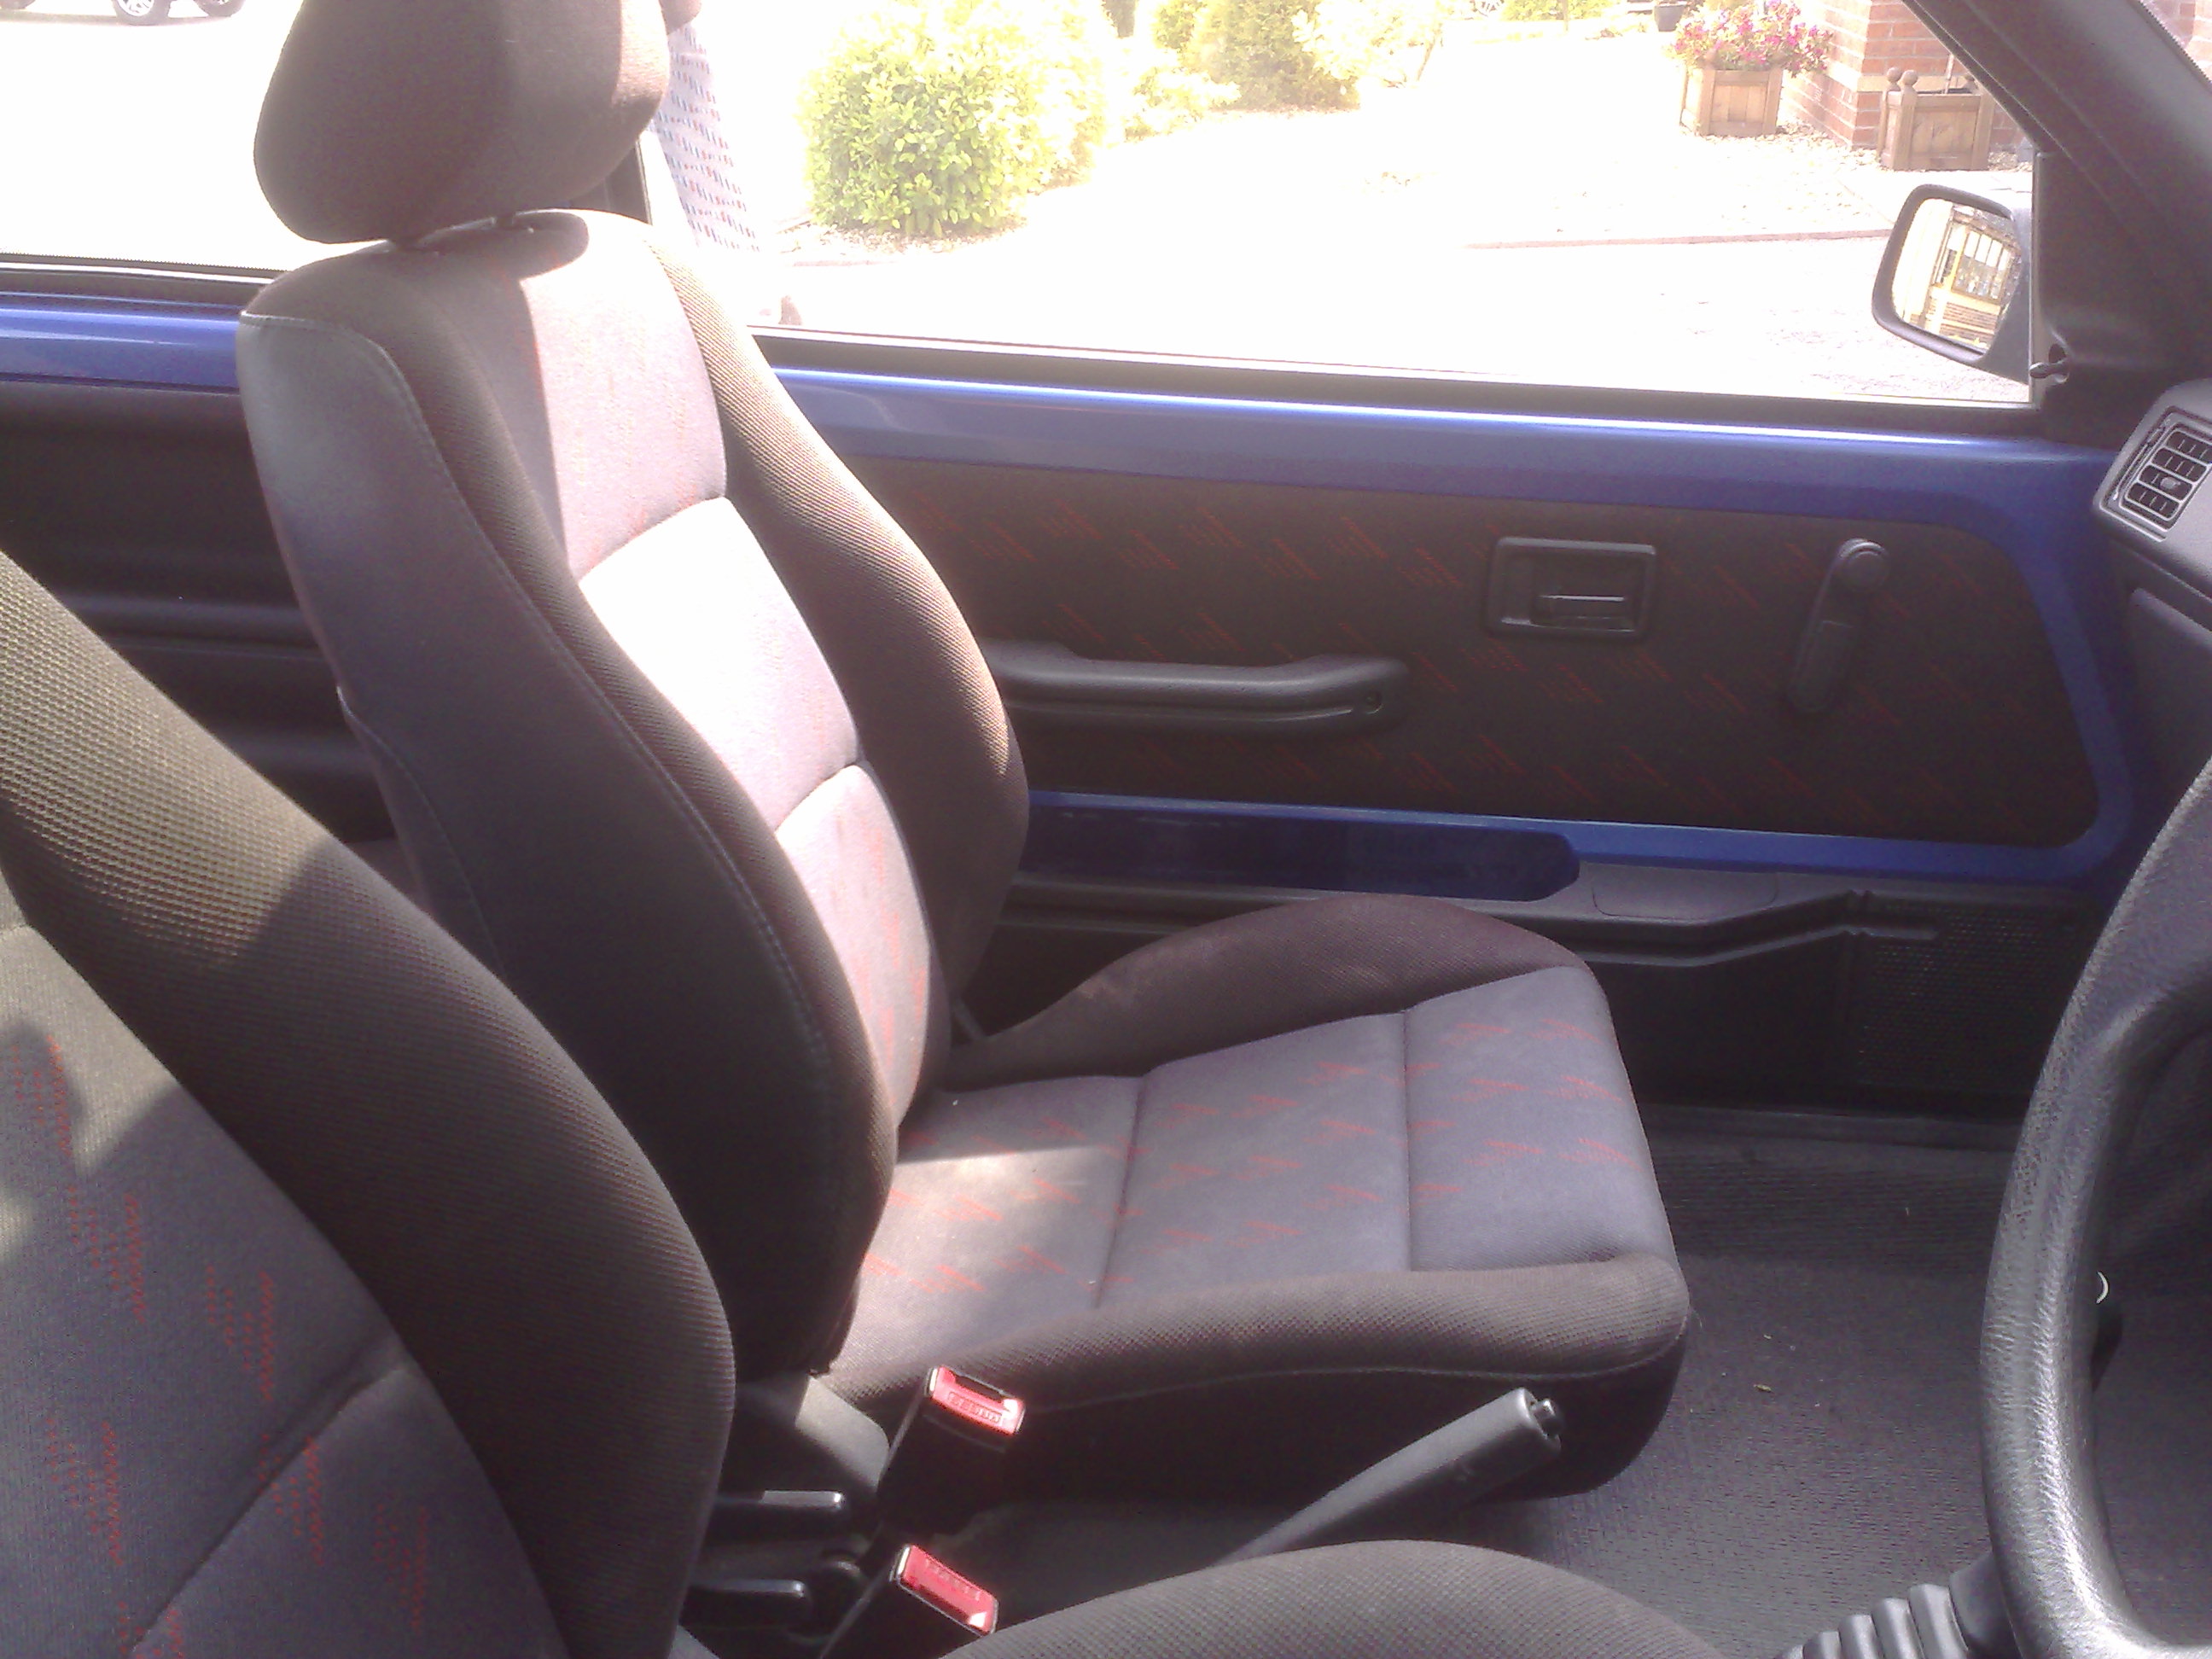 Peugeot 106 Rallye Interior. heres the interior: Front